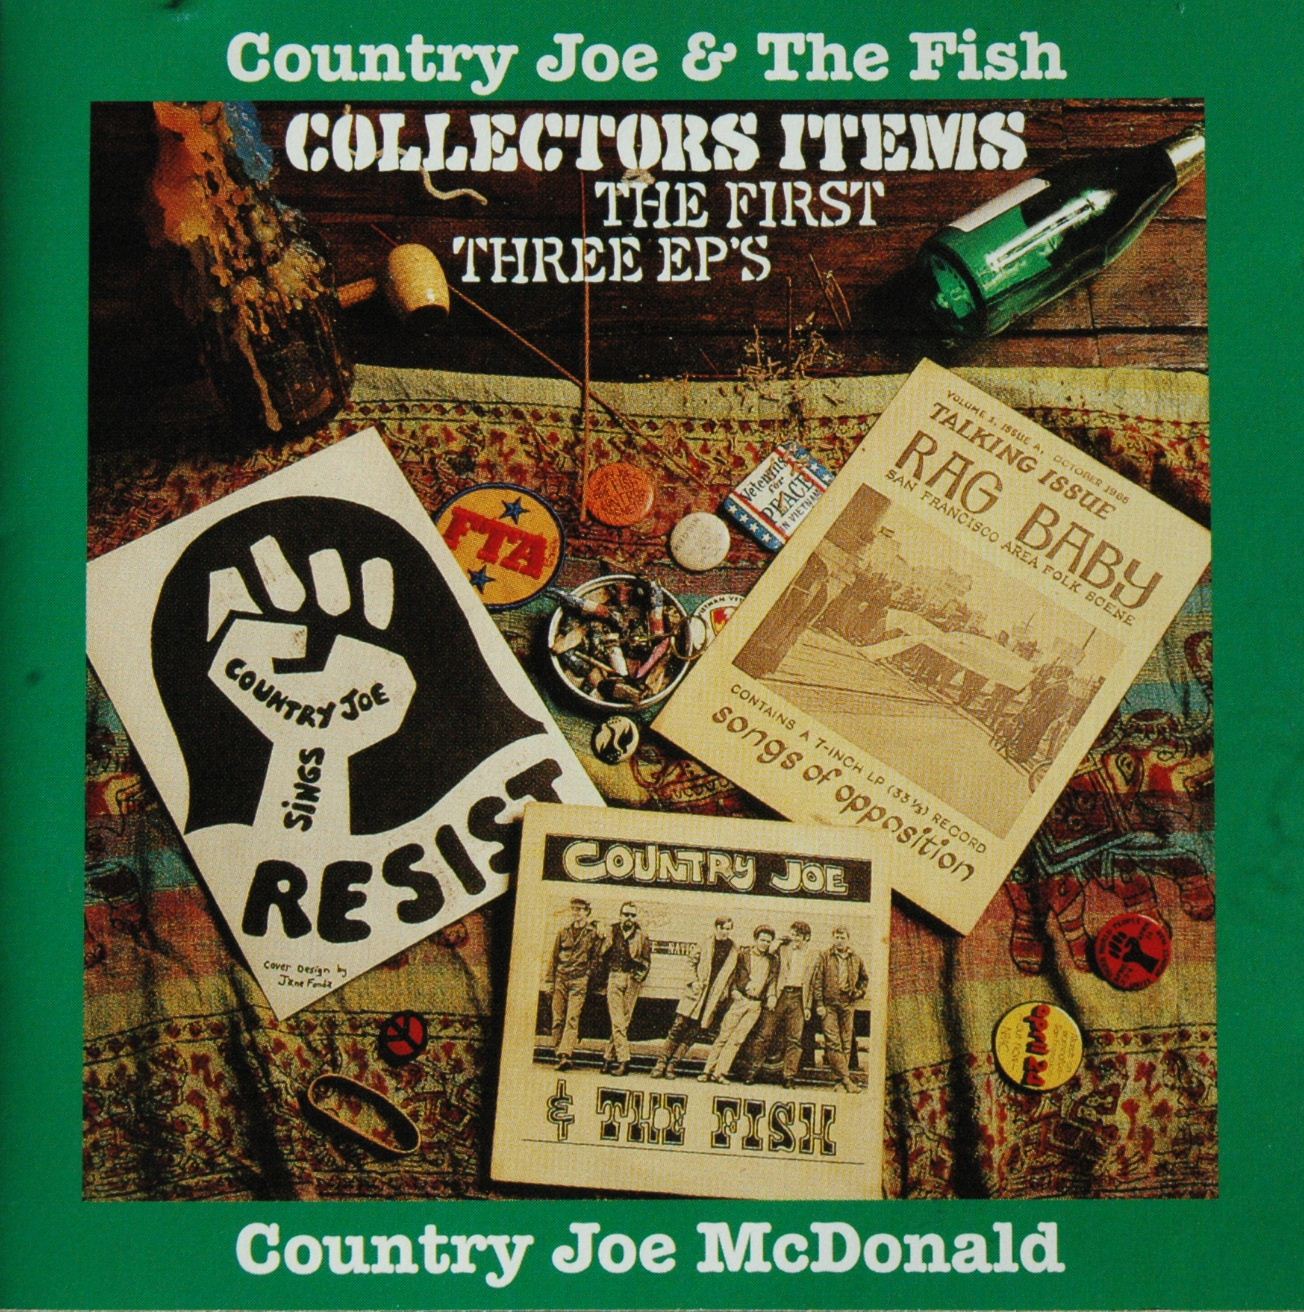 Country Joe & The Fish The First Three EPs